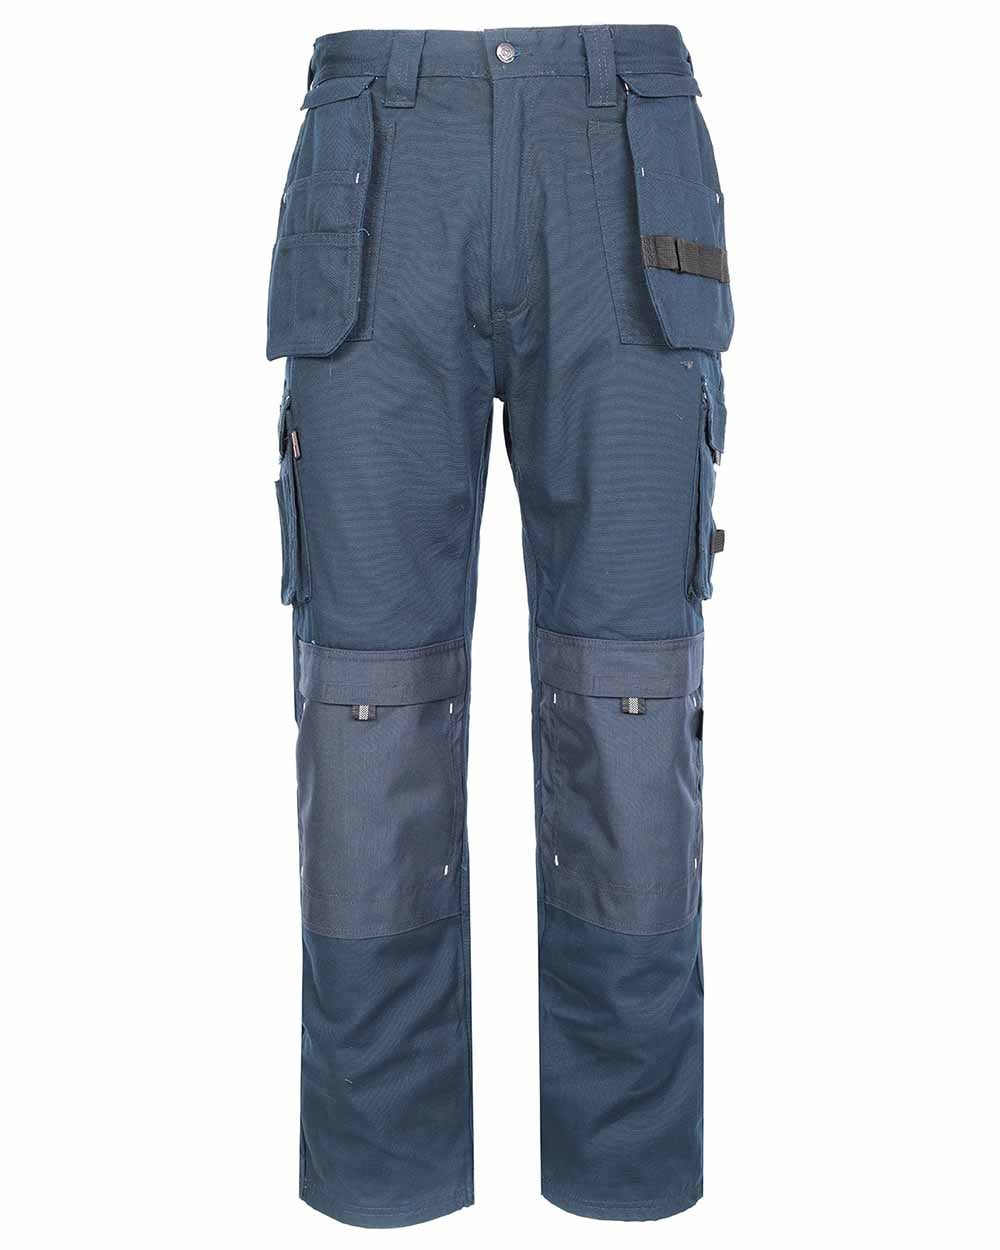 TuffStuff Extreme Work Trousers 